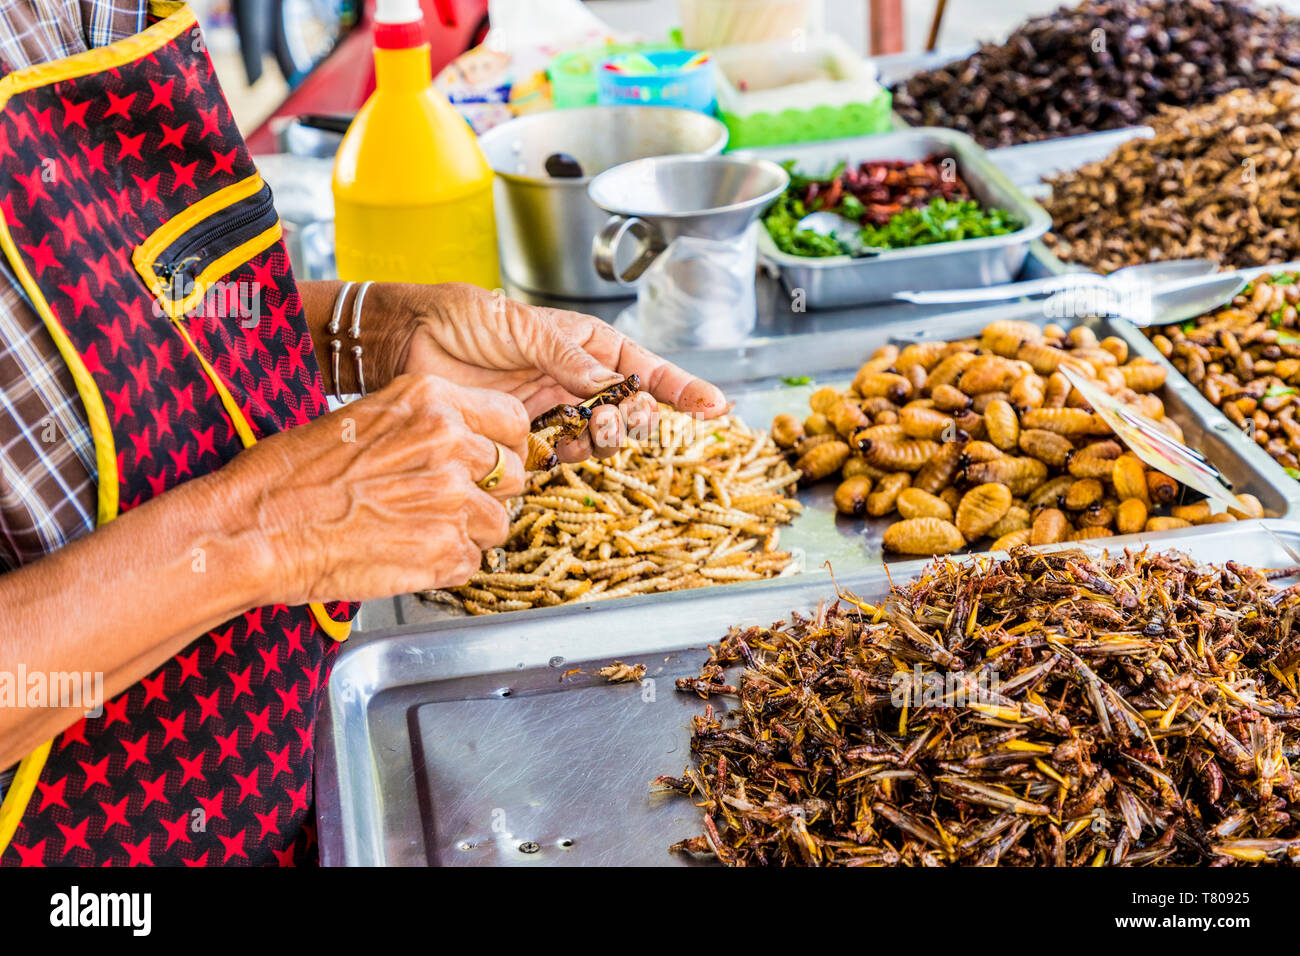 A market stall holder preparing an insect barbecue at Wat Chalong Temple in Phuket, Thailand, Southeast Asia, Asia Stock Photo